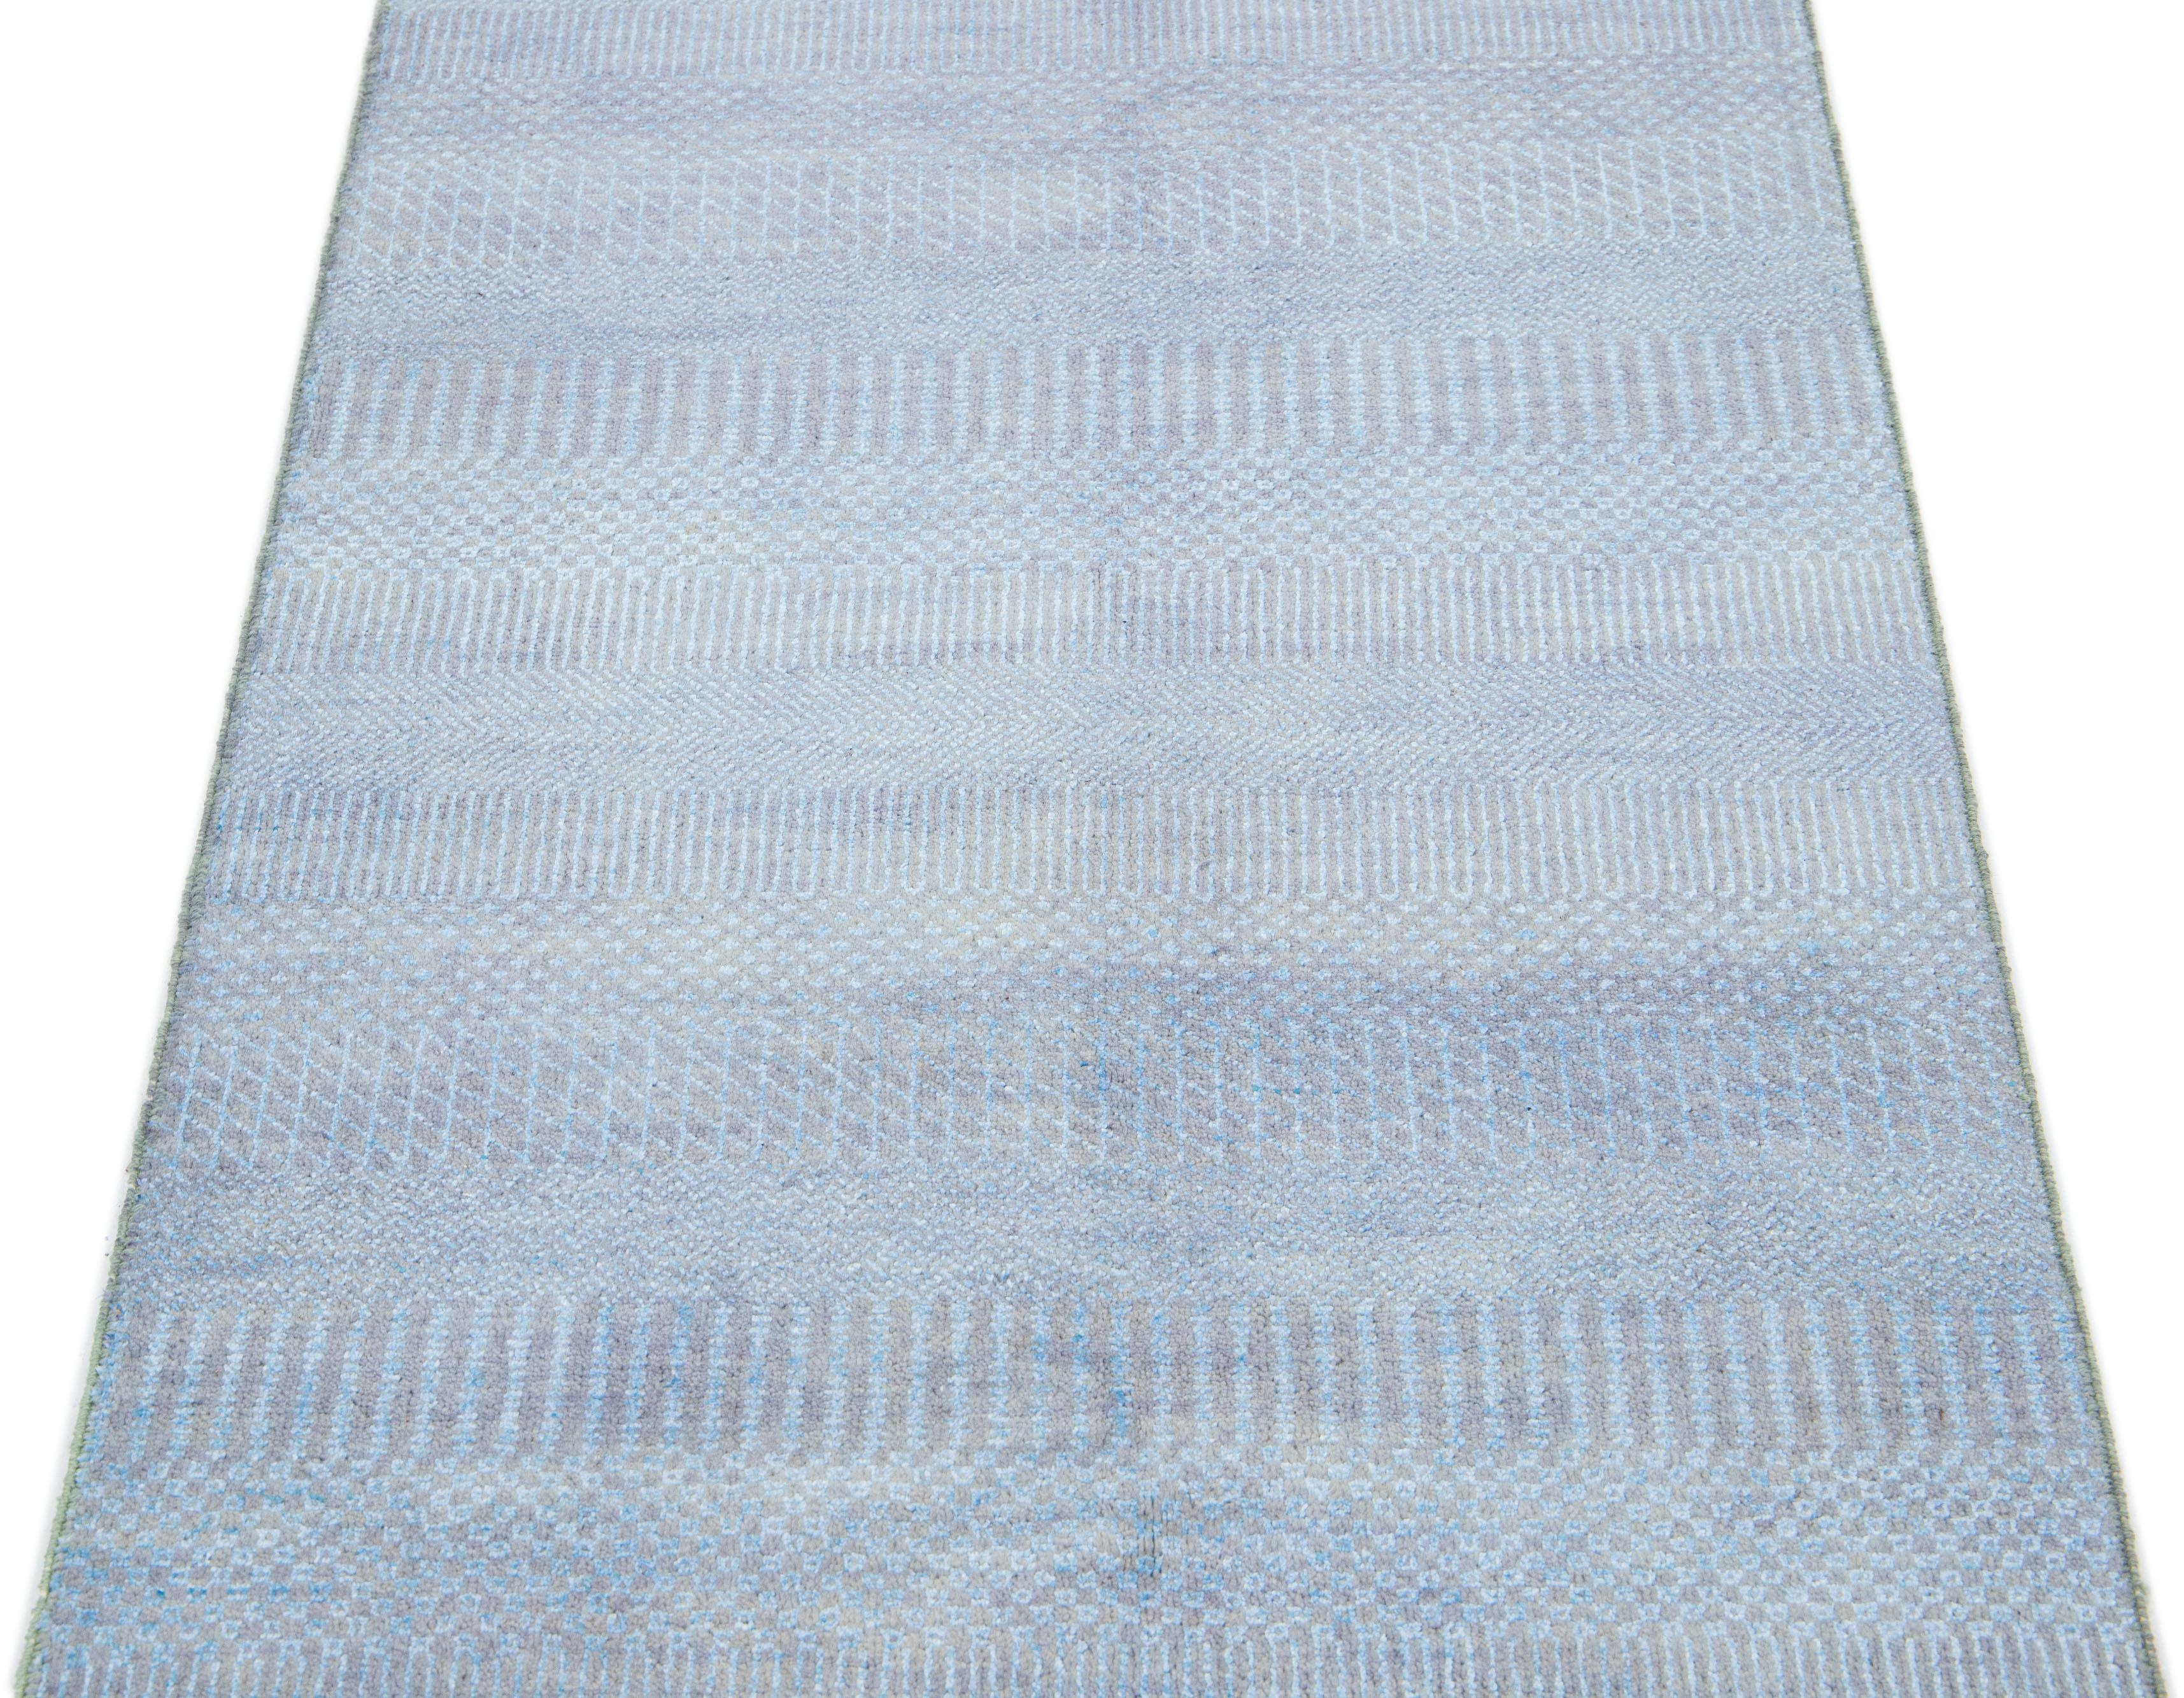 This long hand-knotted rug is made of wool. It features a subtle light blue color scheme accented by an all-over geometric pattern—an ideal addition to any contemporary interior.

This rug measures 2'8